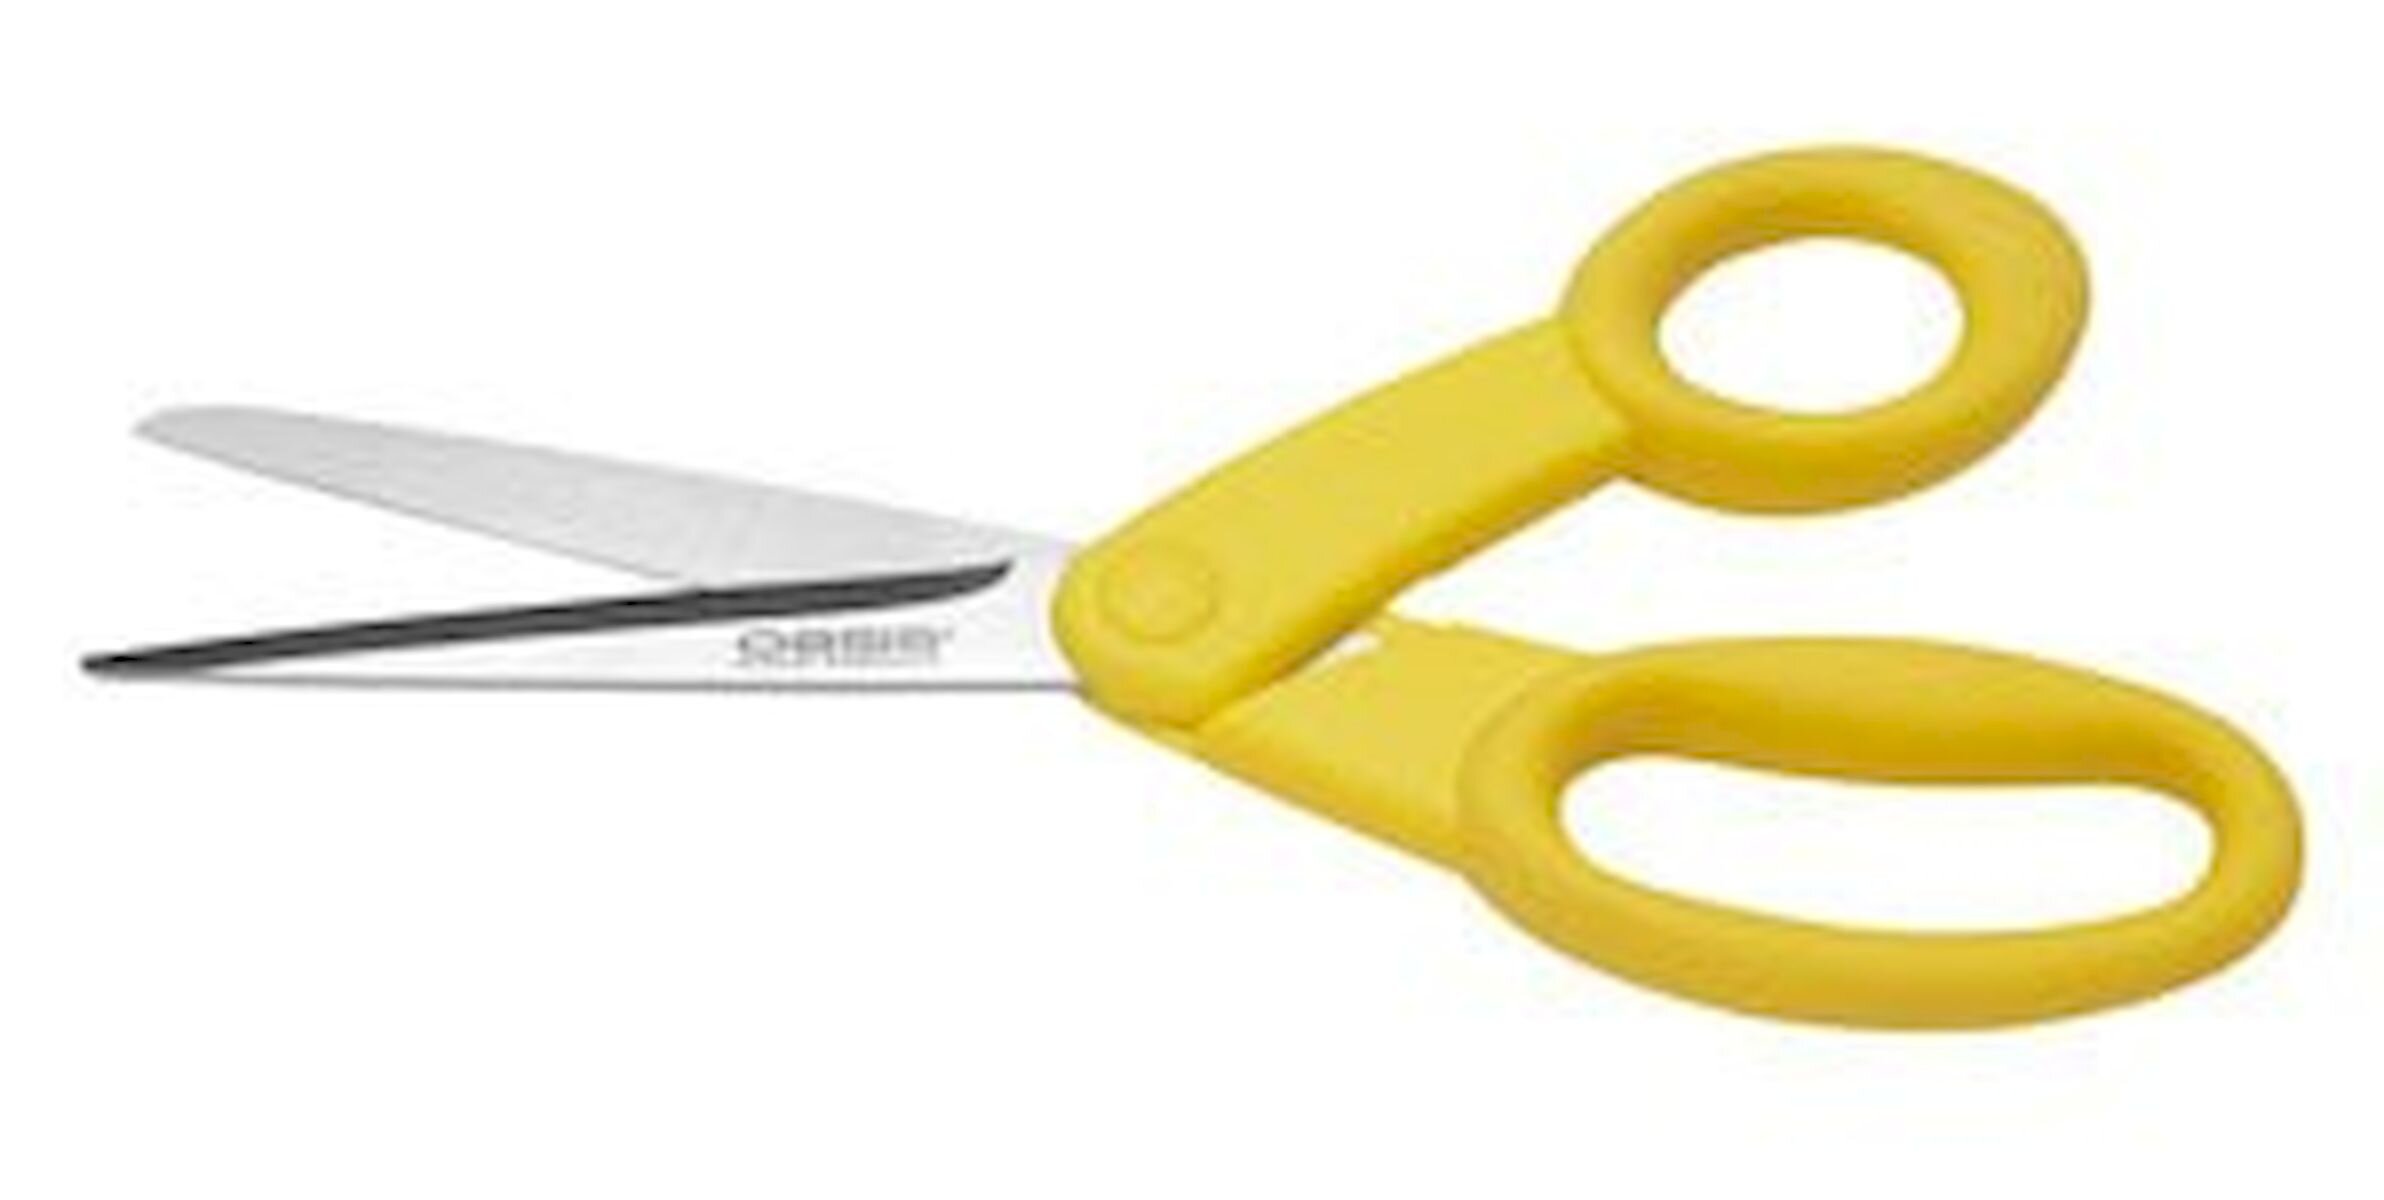 Kitchen Scissors - HPG - Promotional Products Supplier